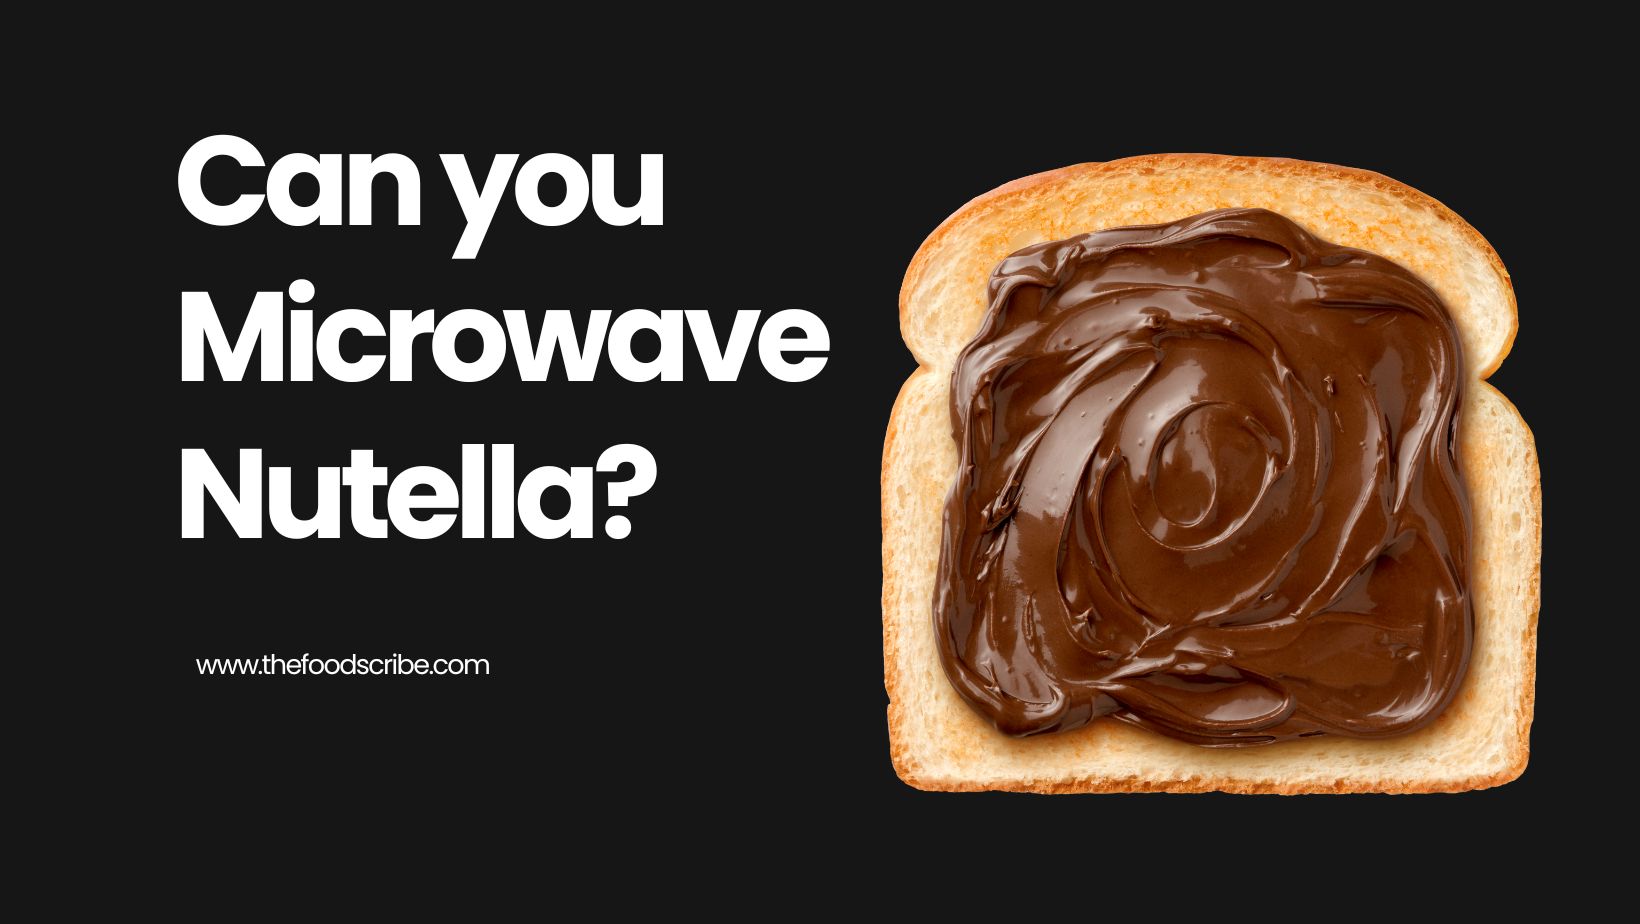 Can you Microwave Nutella